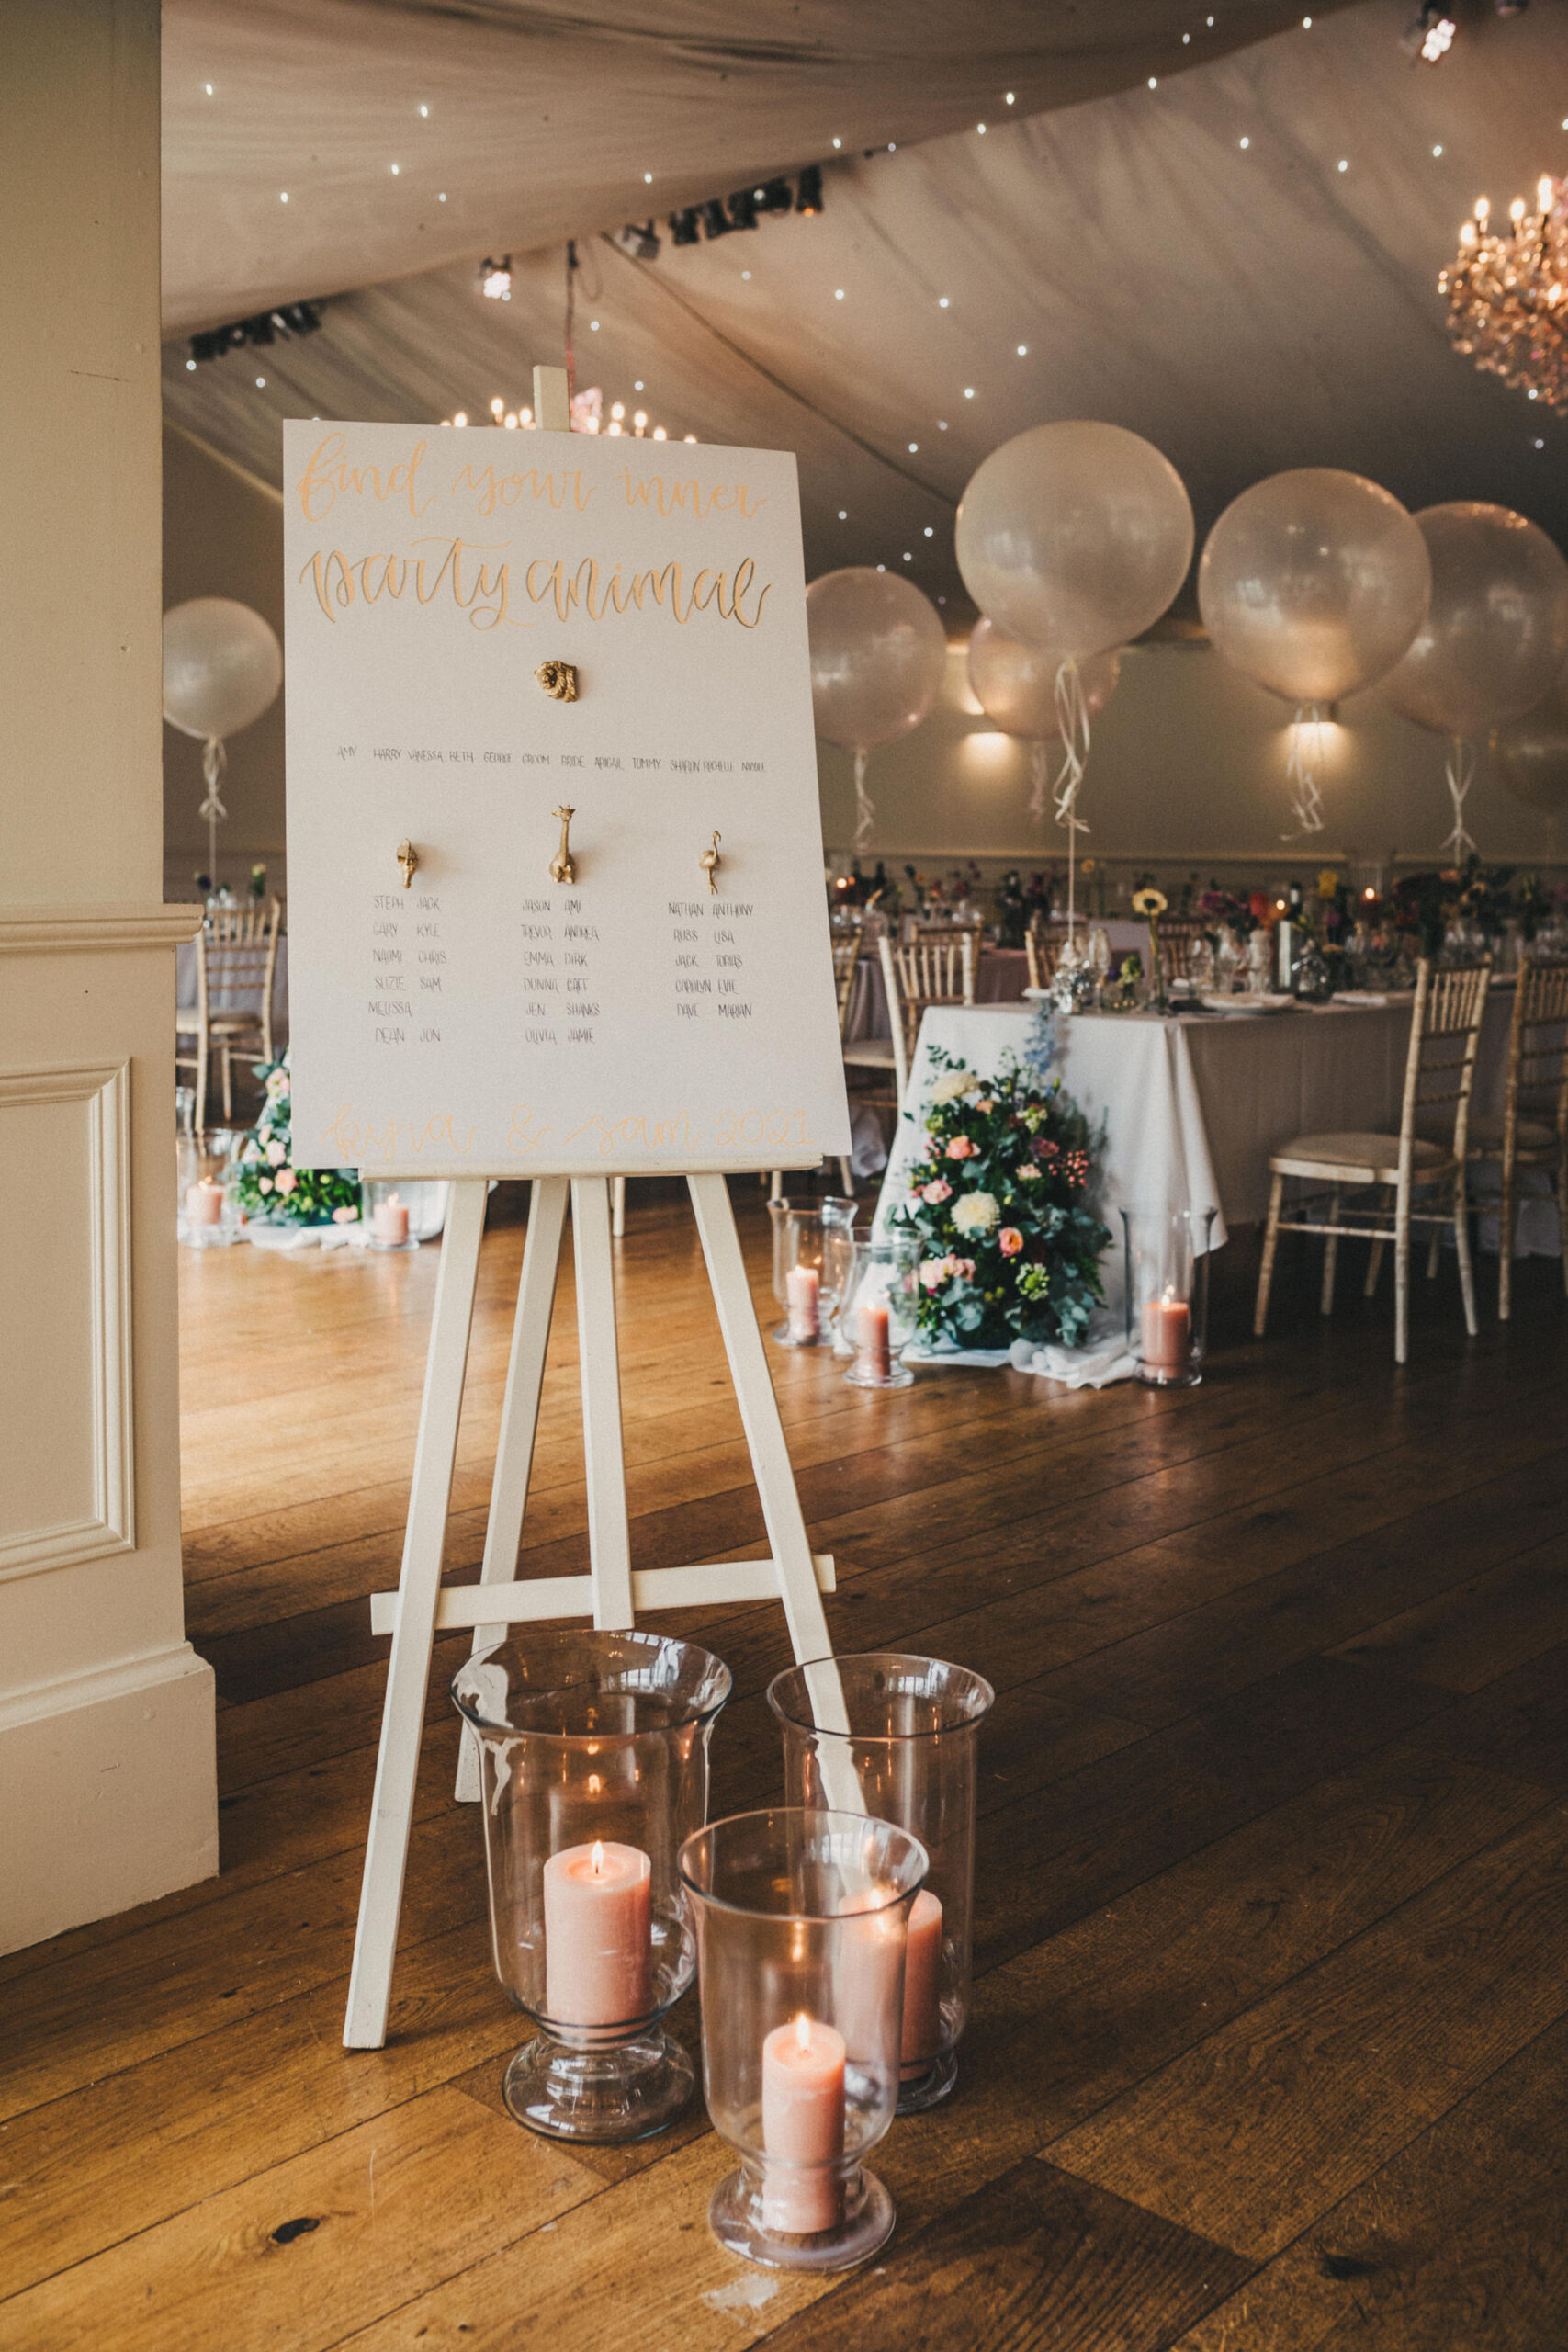 A wedding table plan is propped up on a white easel with tables set up for a wedding breakfast can be seen in the background